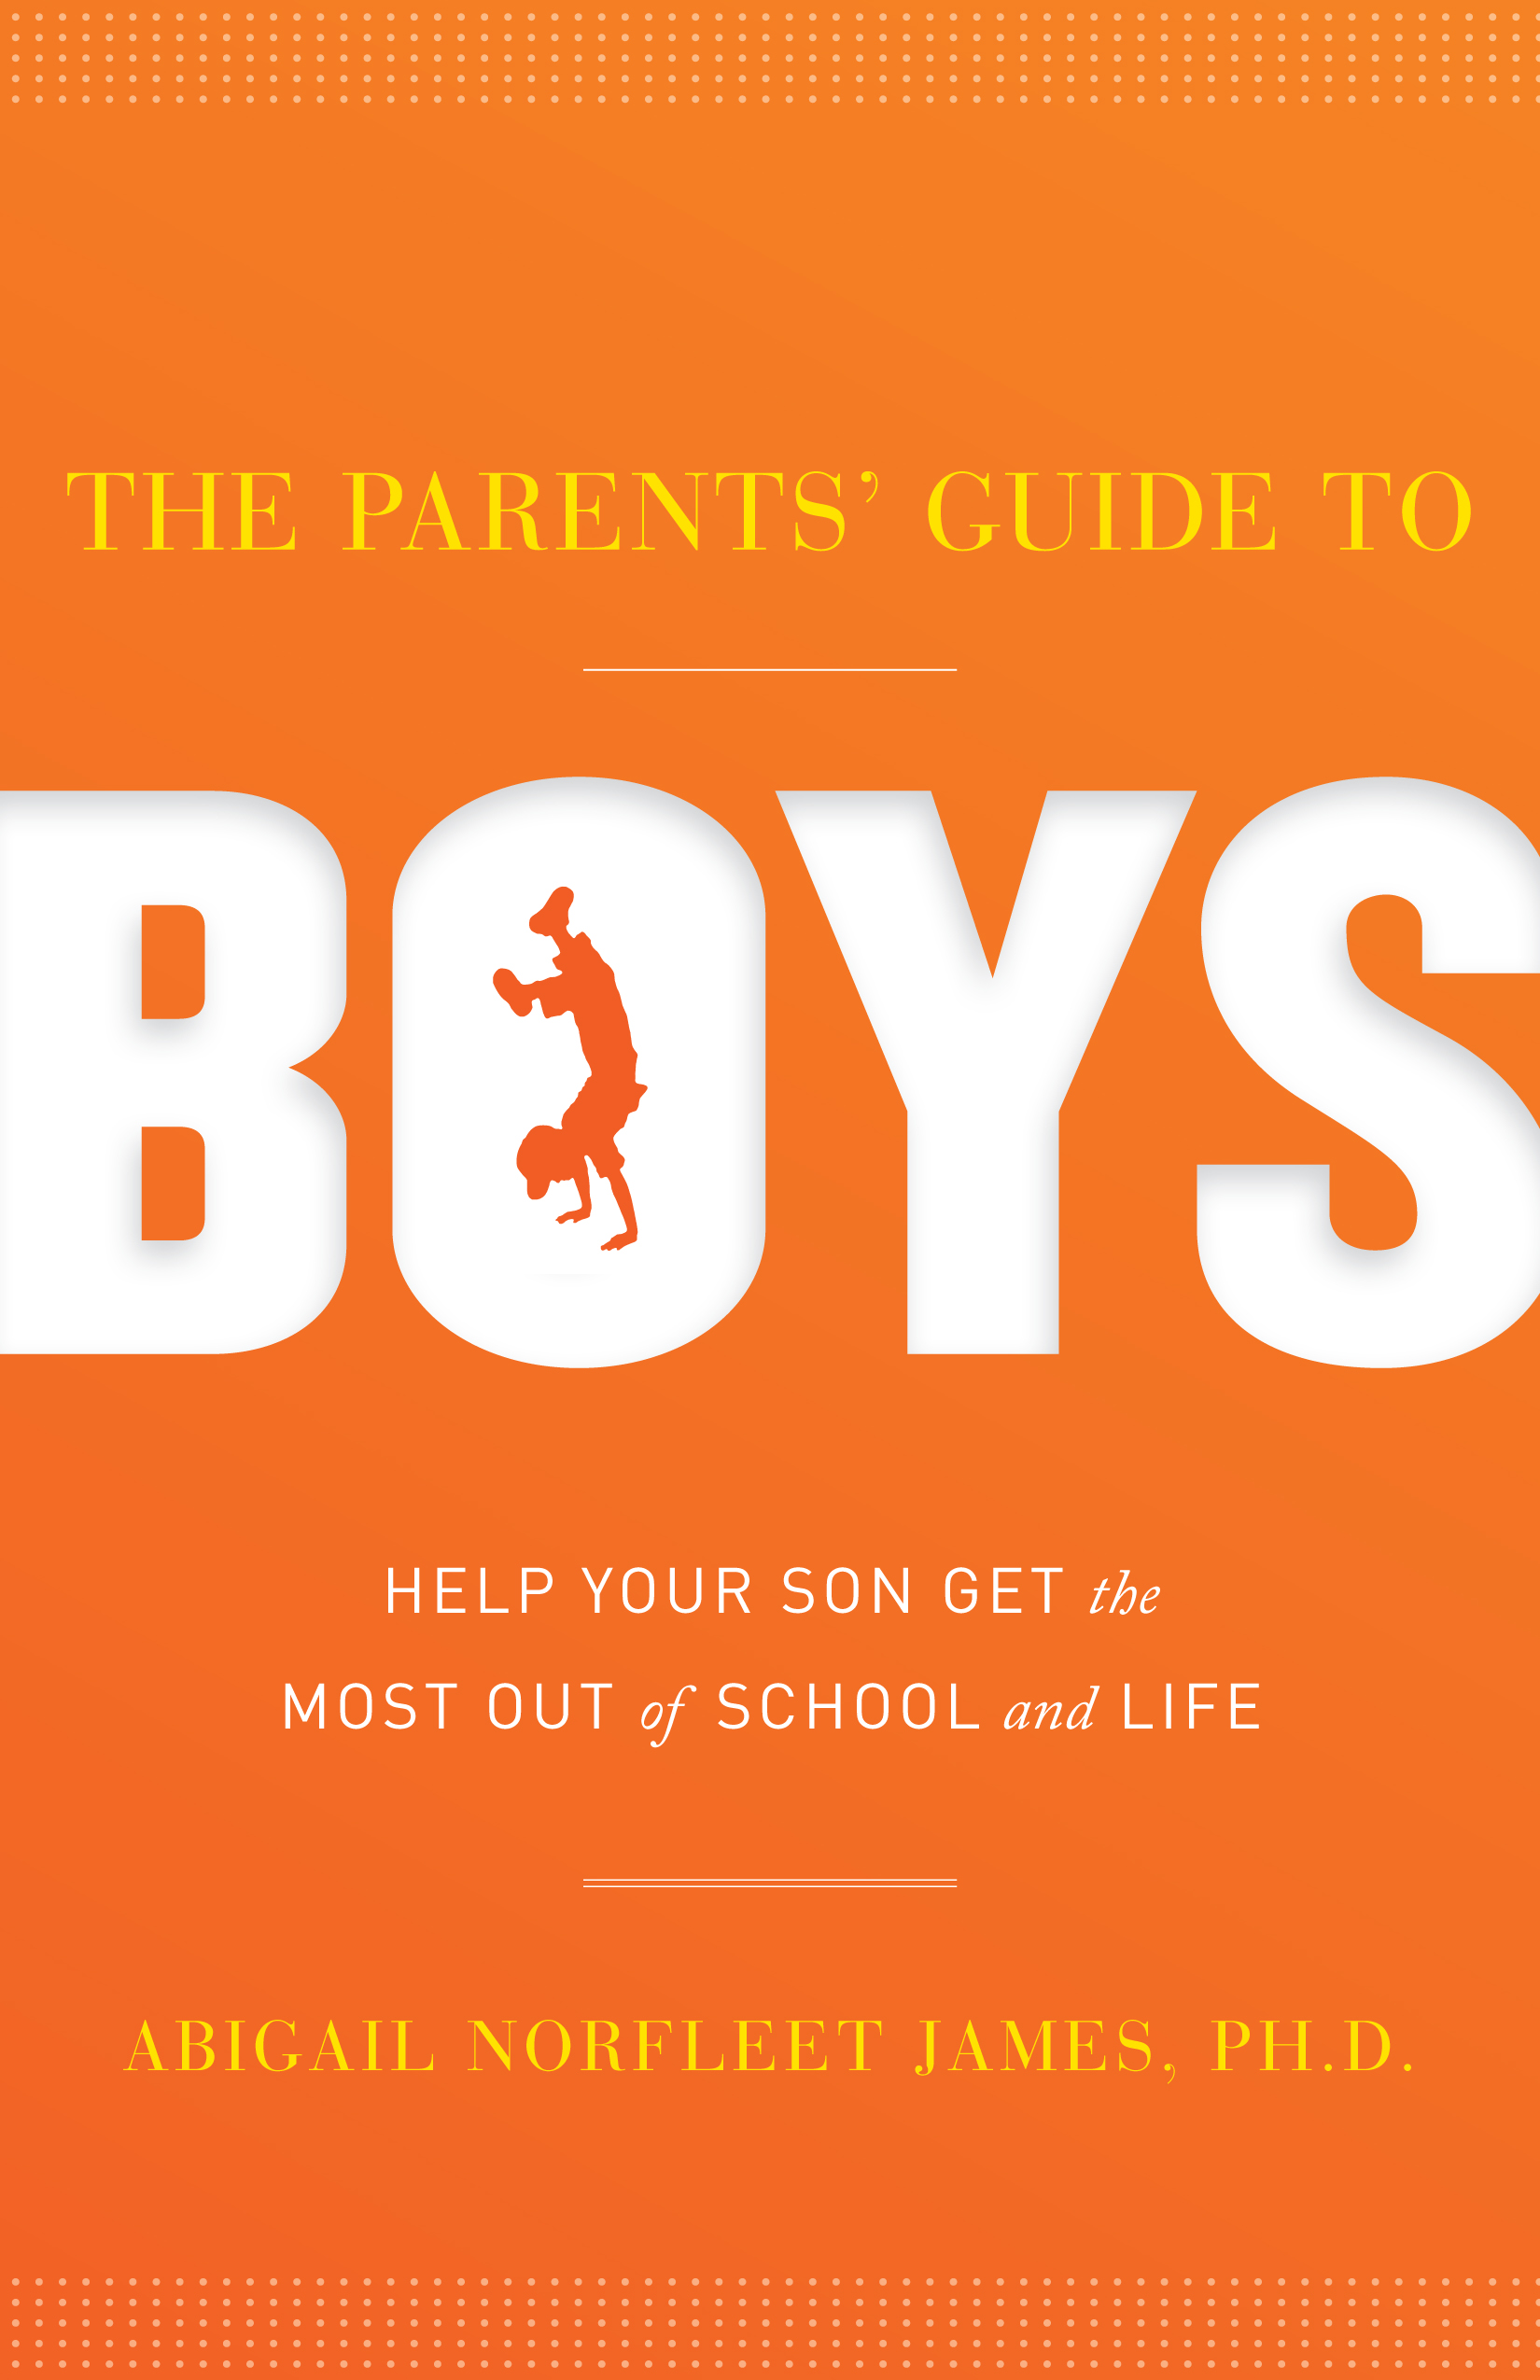 the parents' guide to boys cover image